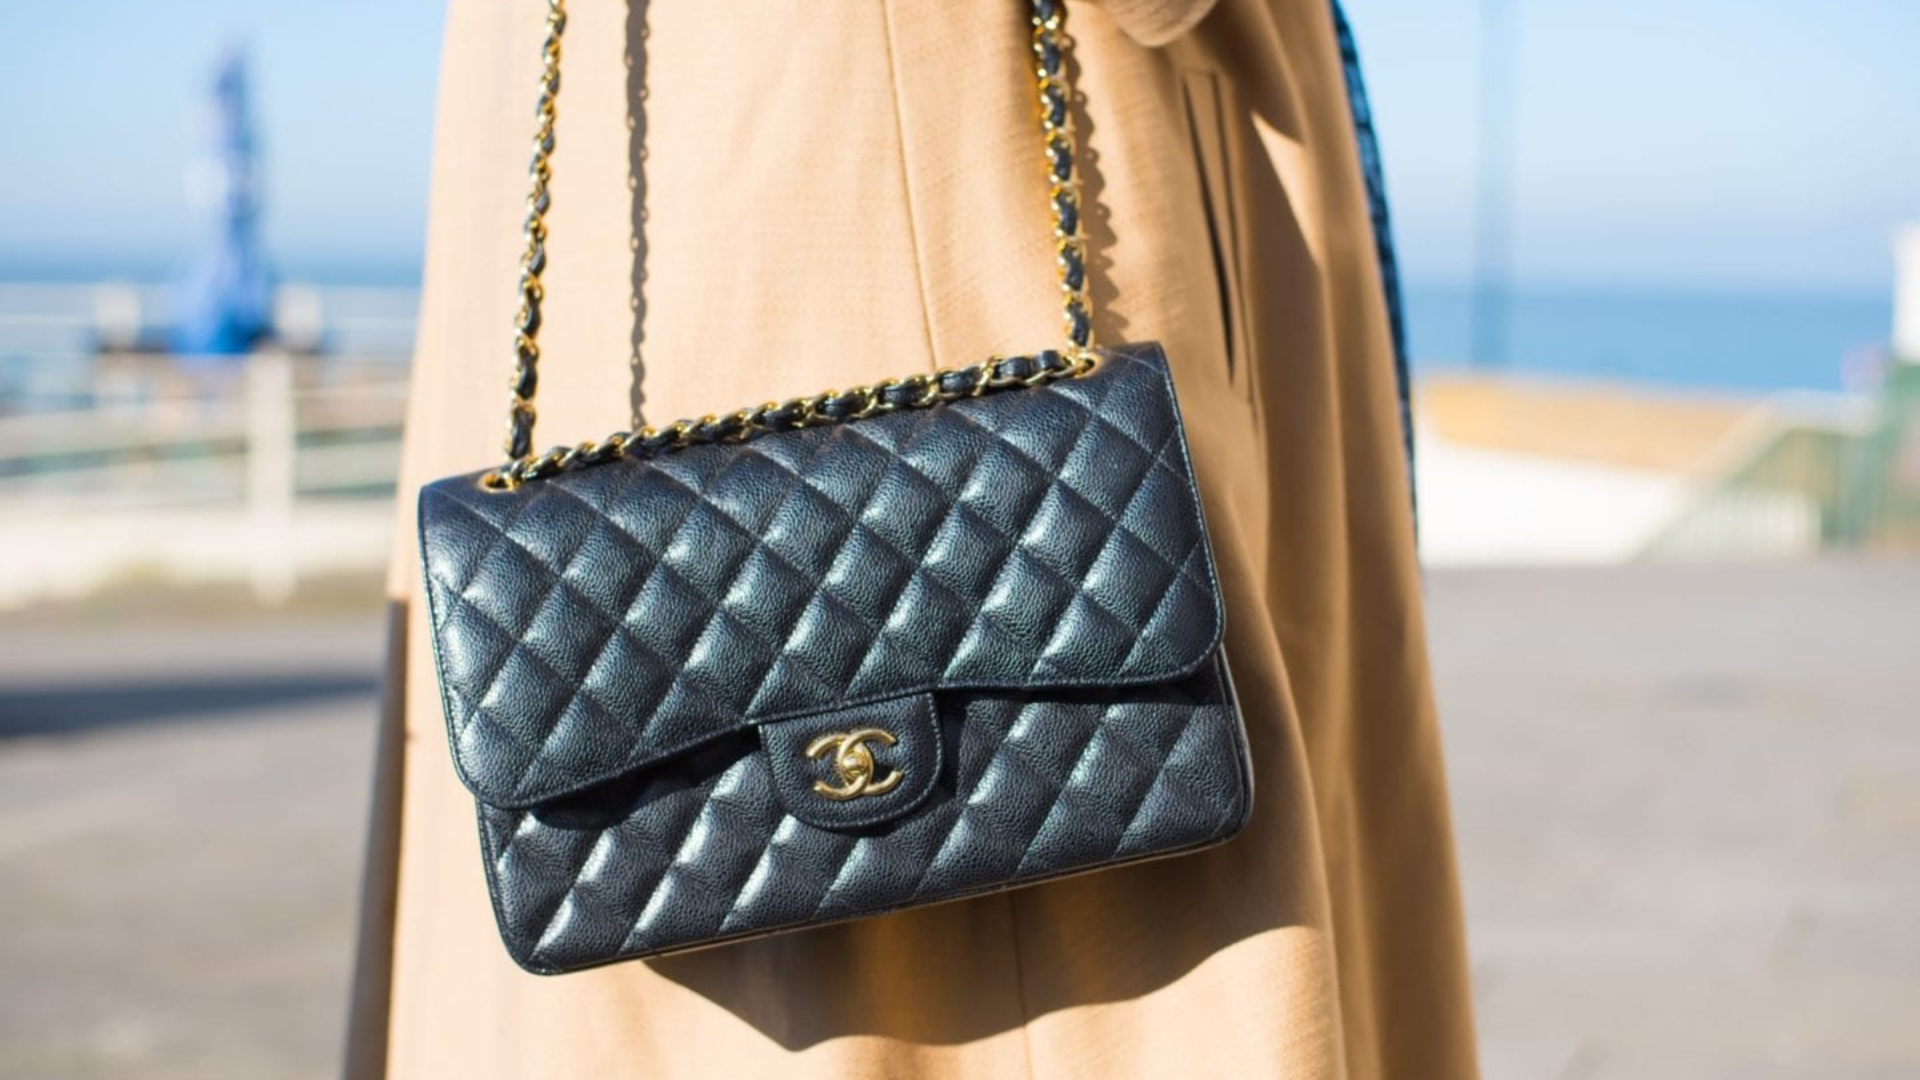 What's Really Behind the Chanel Price Increases? - PurseBlog